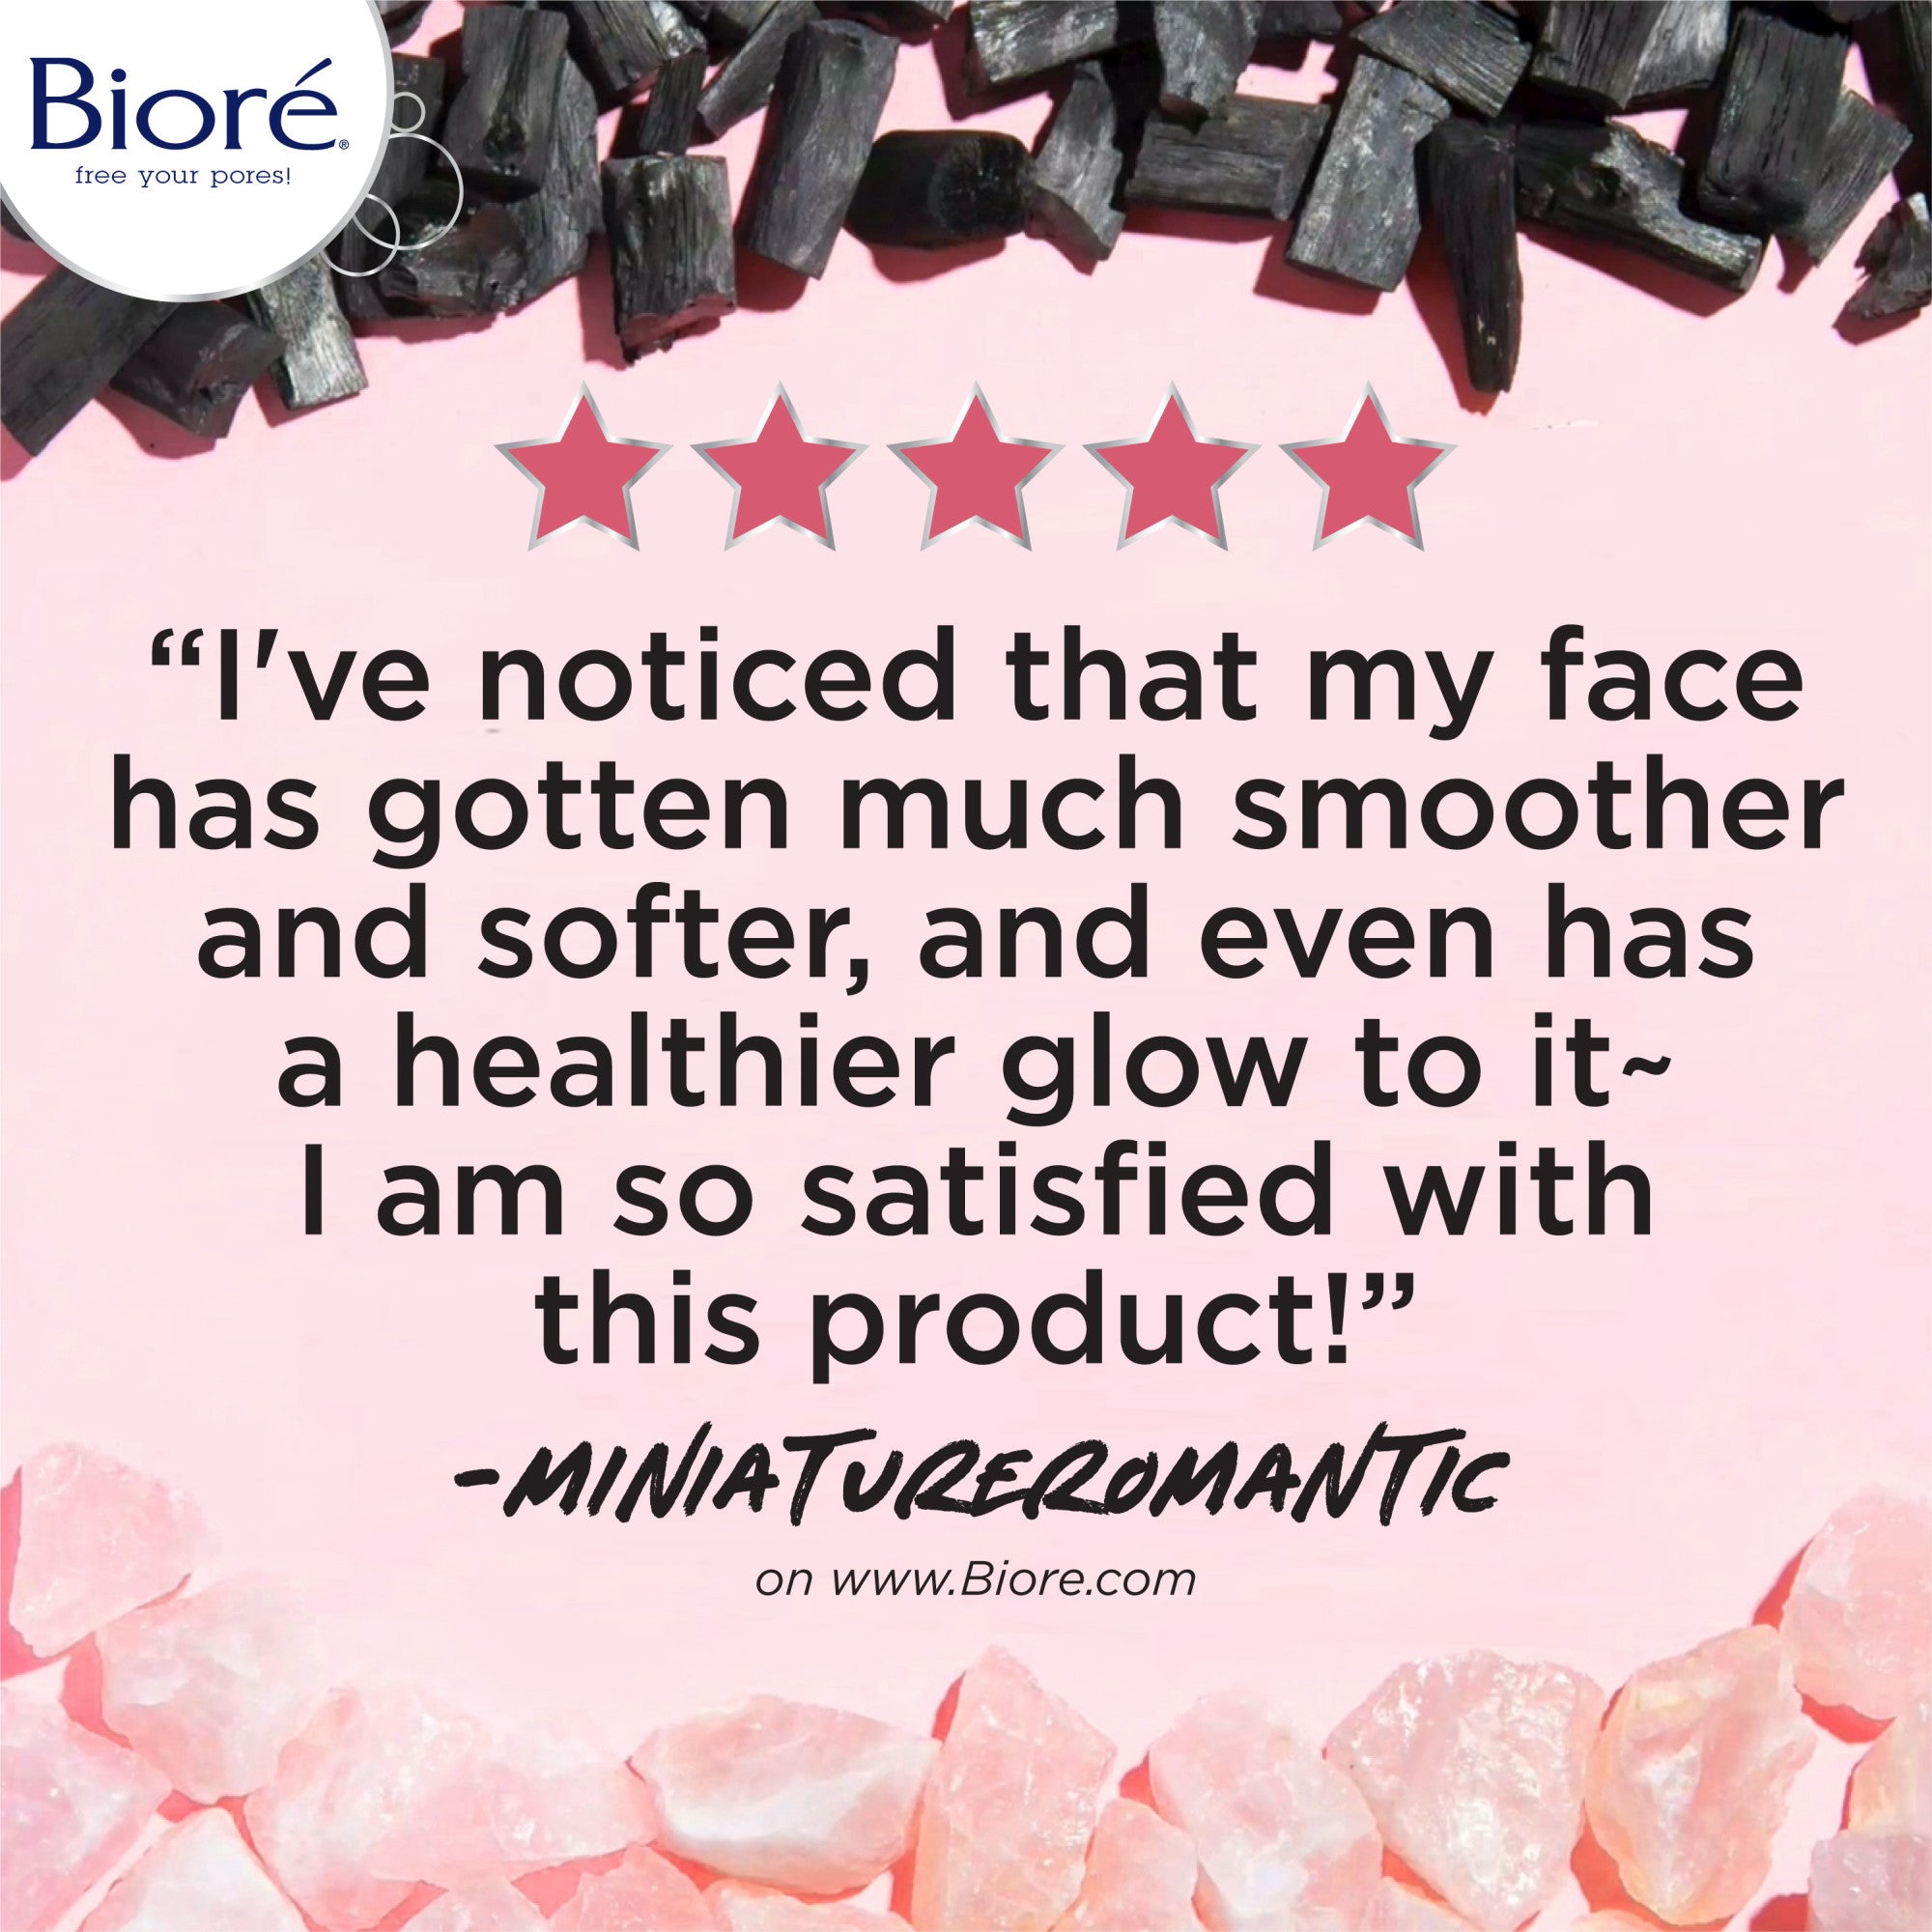 5 Star review "I've noticed that my face has gotten much smoother and softer, and even has a healthier glow to is ~ I am so satisfied with this product!" - MiniaTureromantic on www.biore.com